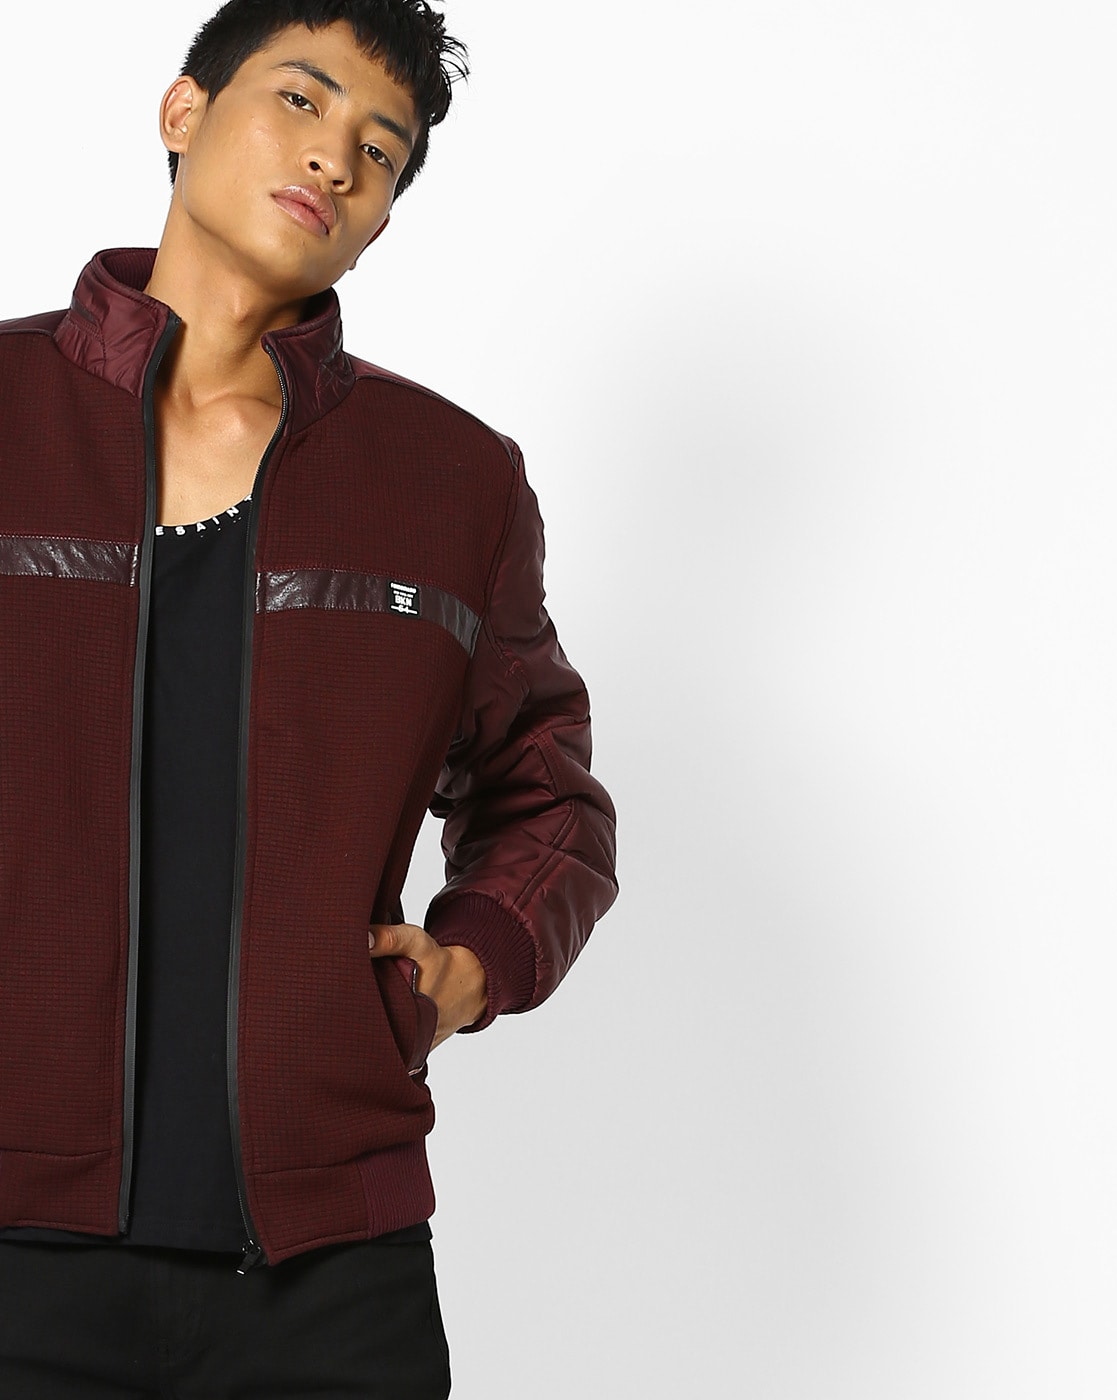 Buy Qube By Fort Collins Mens Jacket at Amazon.in